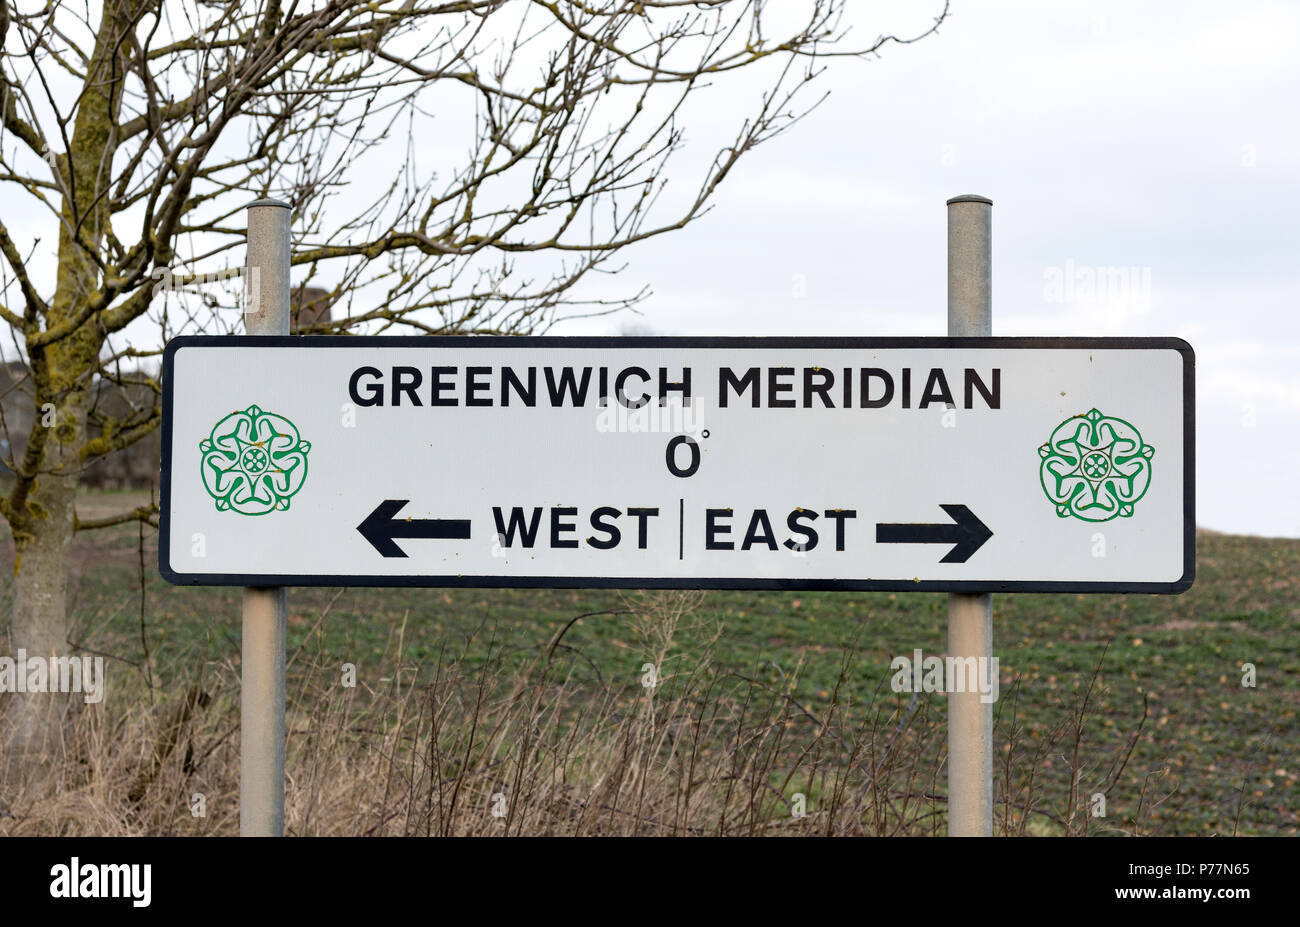 The Greenwich meridian sign at Patrington in East Yorkshire Stock Photo